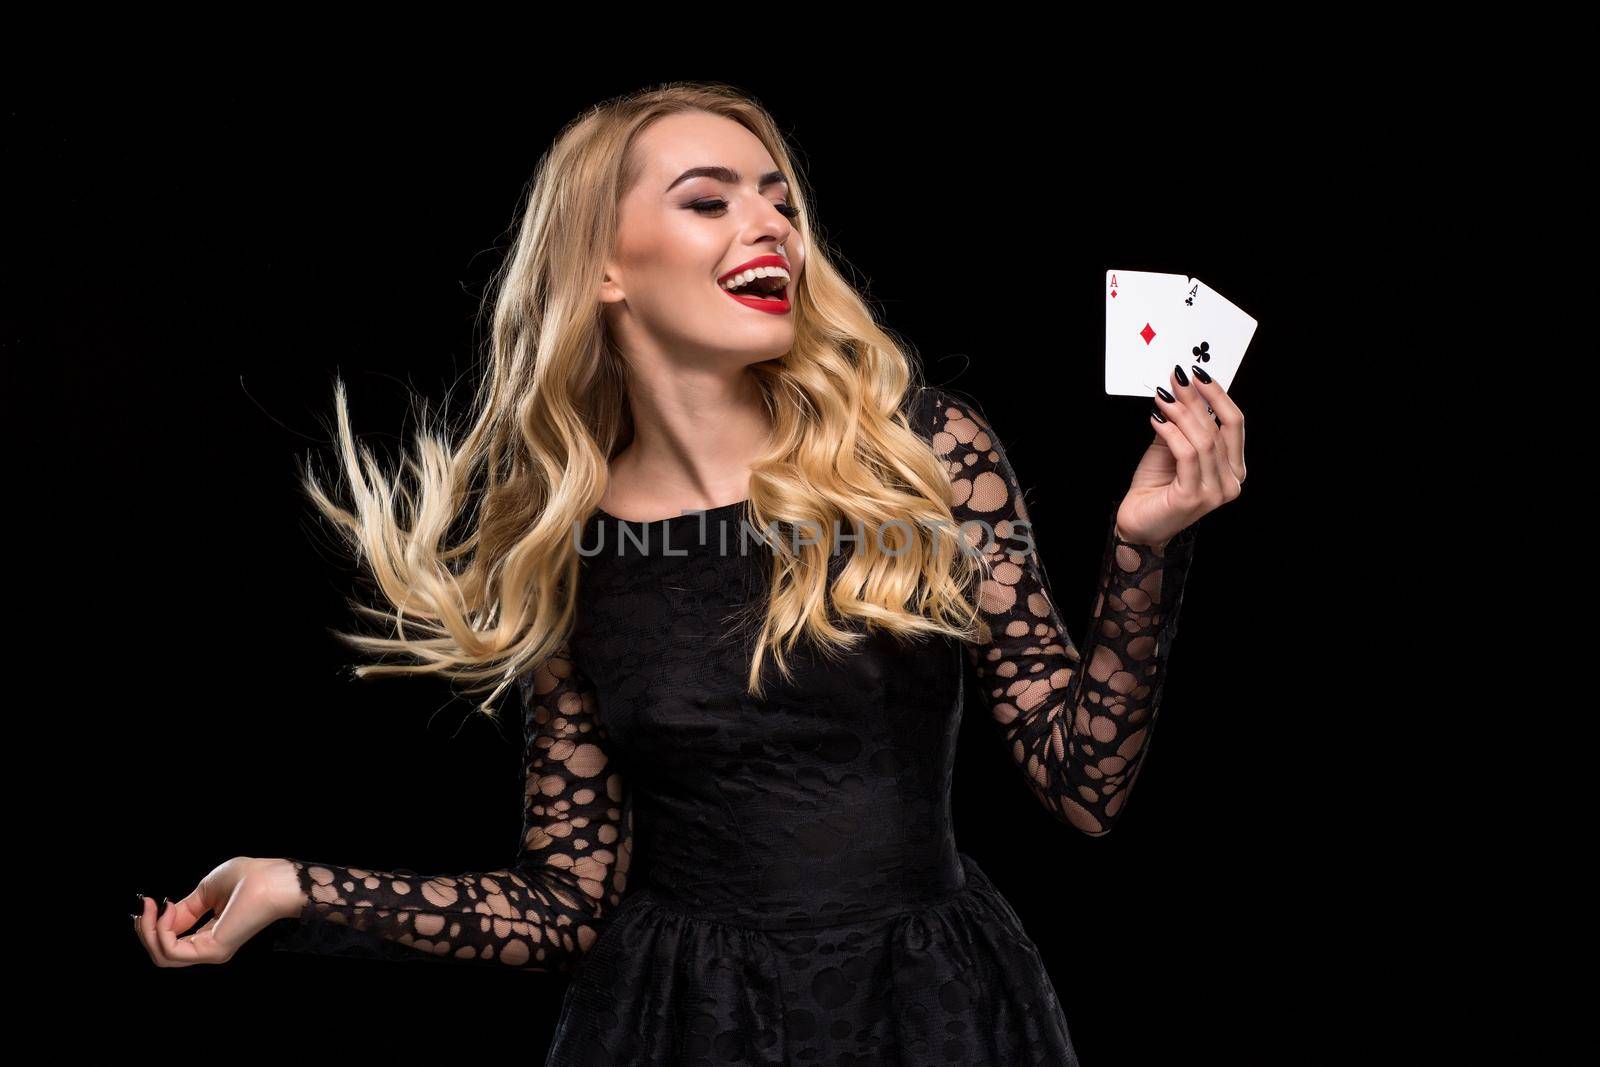 Beautiful young woman in black dress holding two ace of cards in her hand, isolated on black background. Poker. Casino. Roulette Blackjack Spin. Caucasian woman looking at the cards